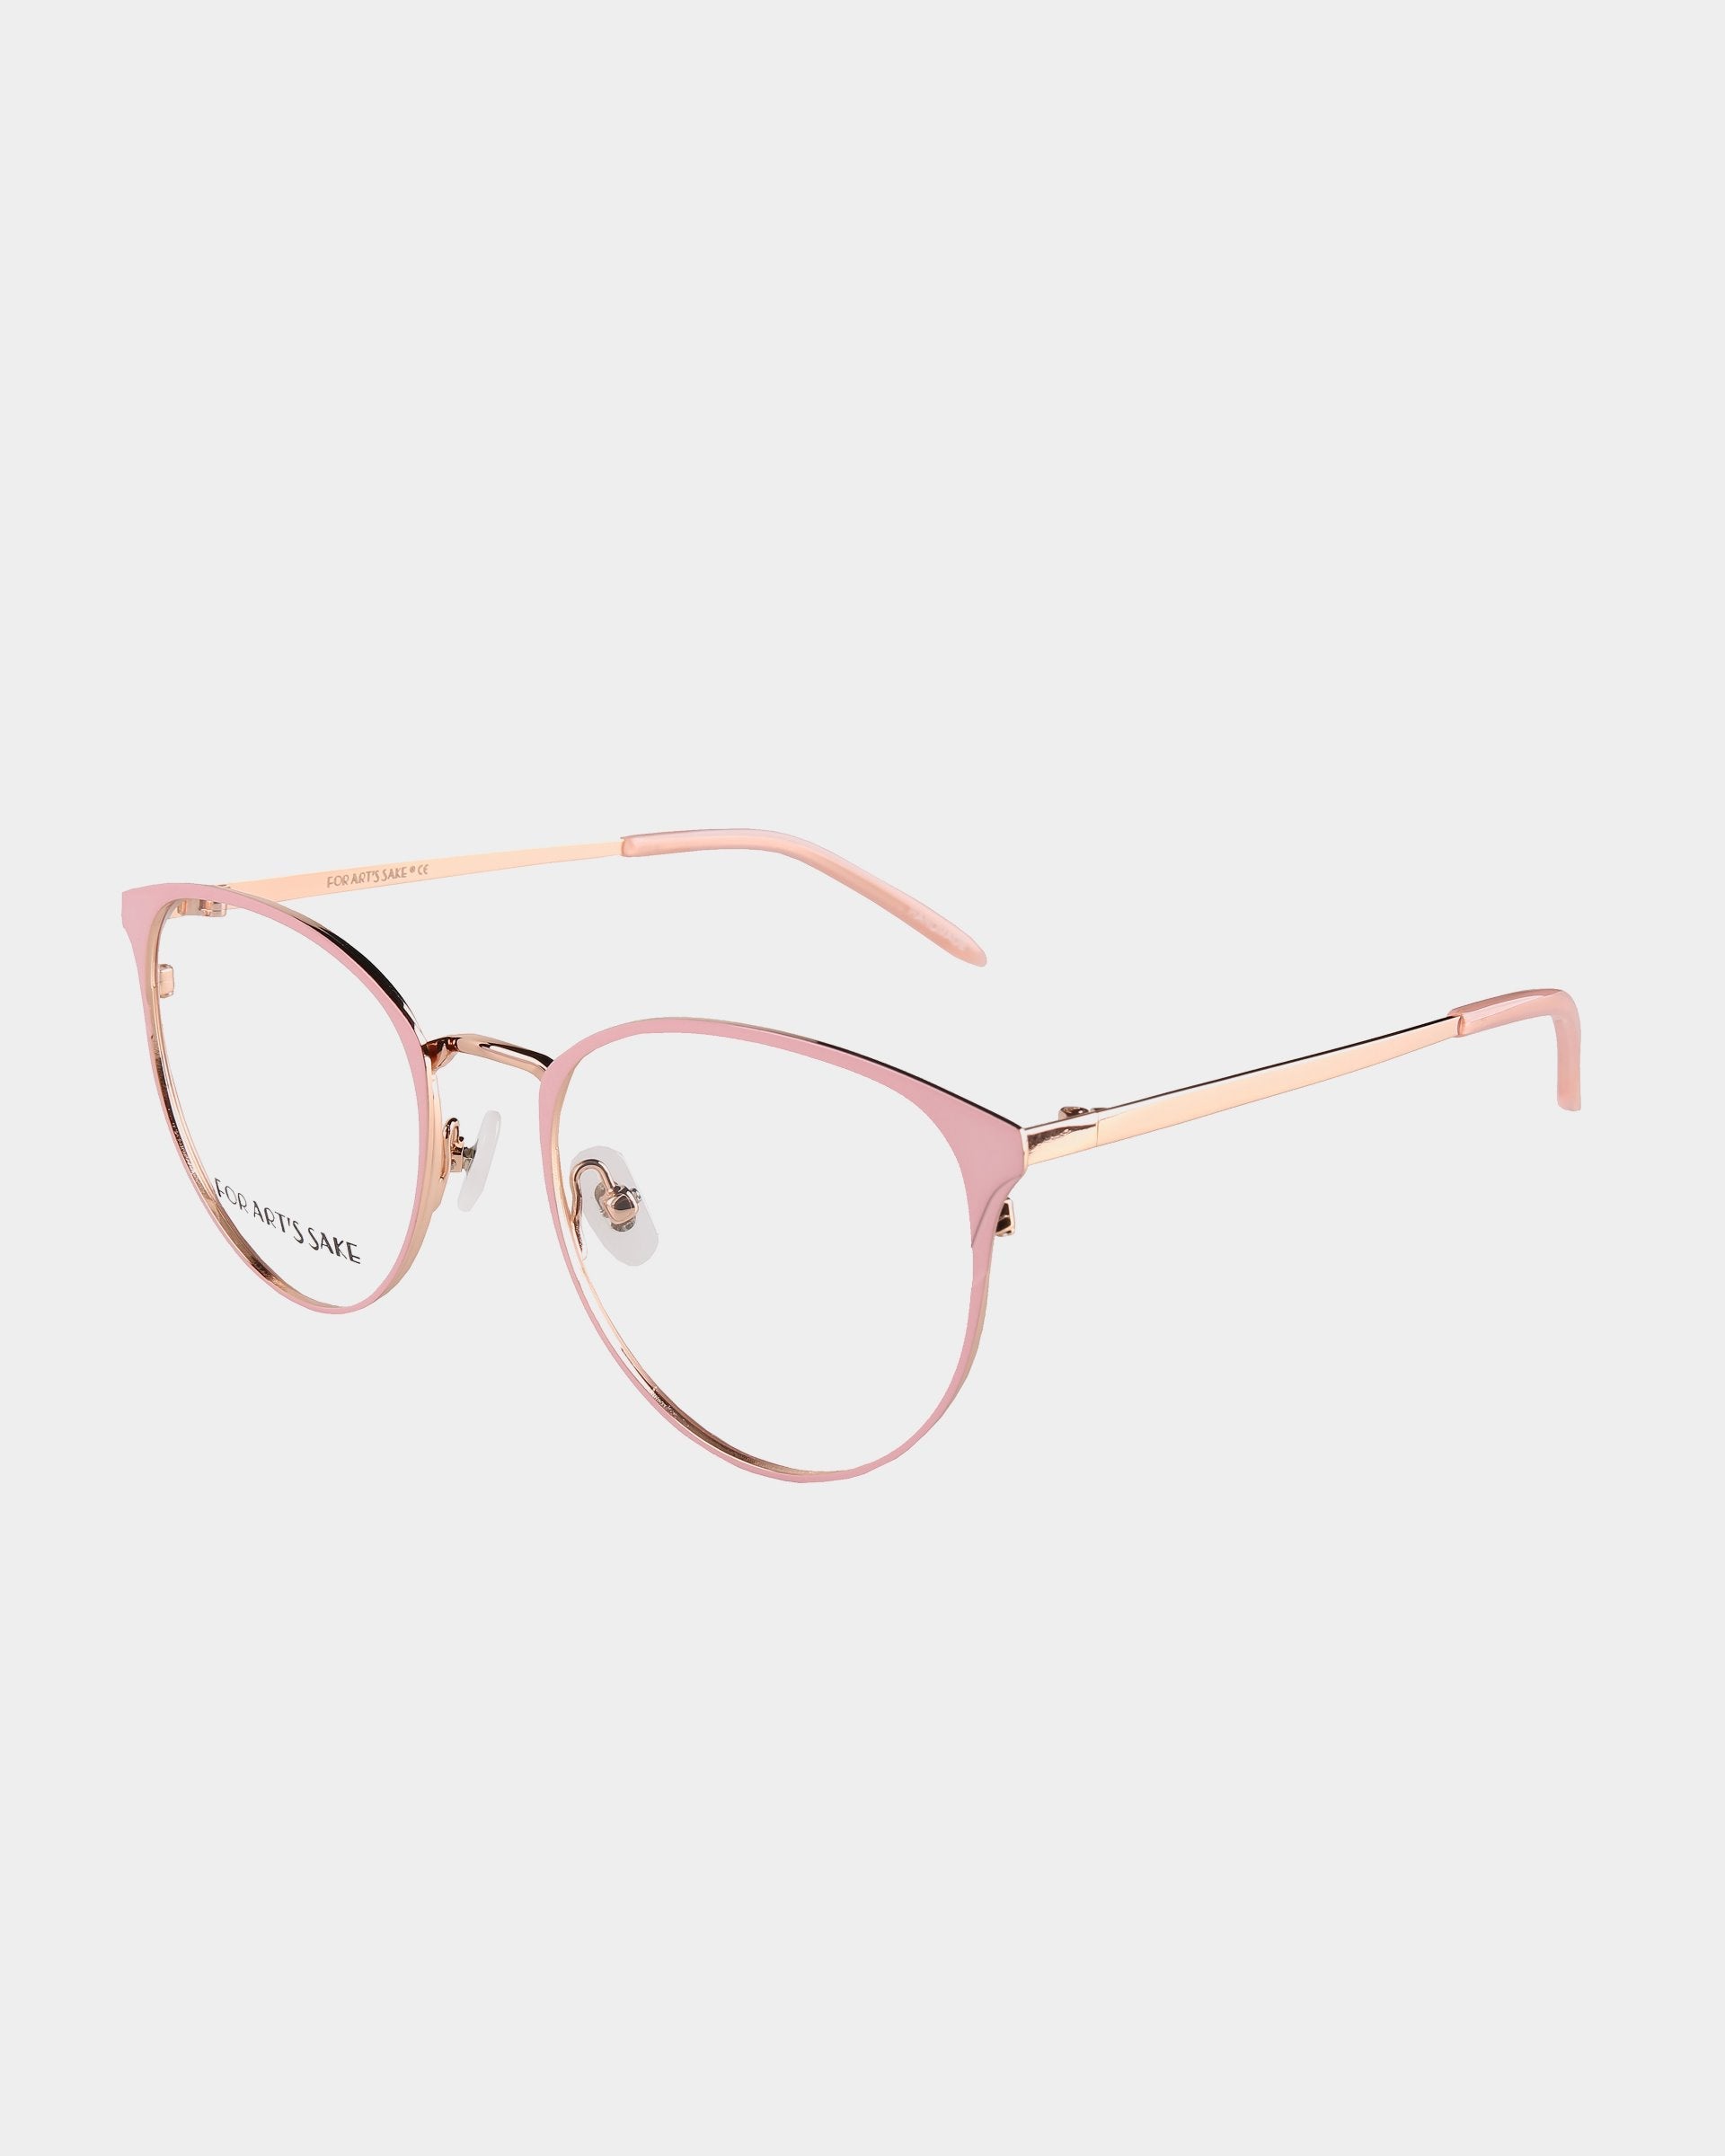 A pair of stylish Olivia eyeglasses with pink metallic frames and clear lenses, featuring a slender rose gold finish extending to the curved ear pieces for comfort. These chic glasses by For Art&#39;s Sake® also offer UV Protection, perfect for everyday wear. Set against a plain white background.